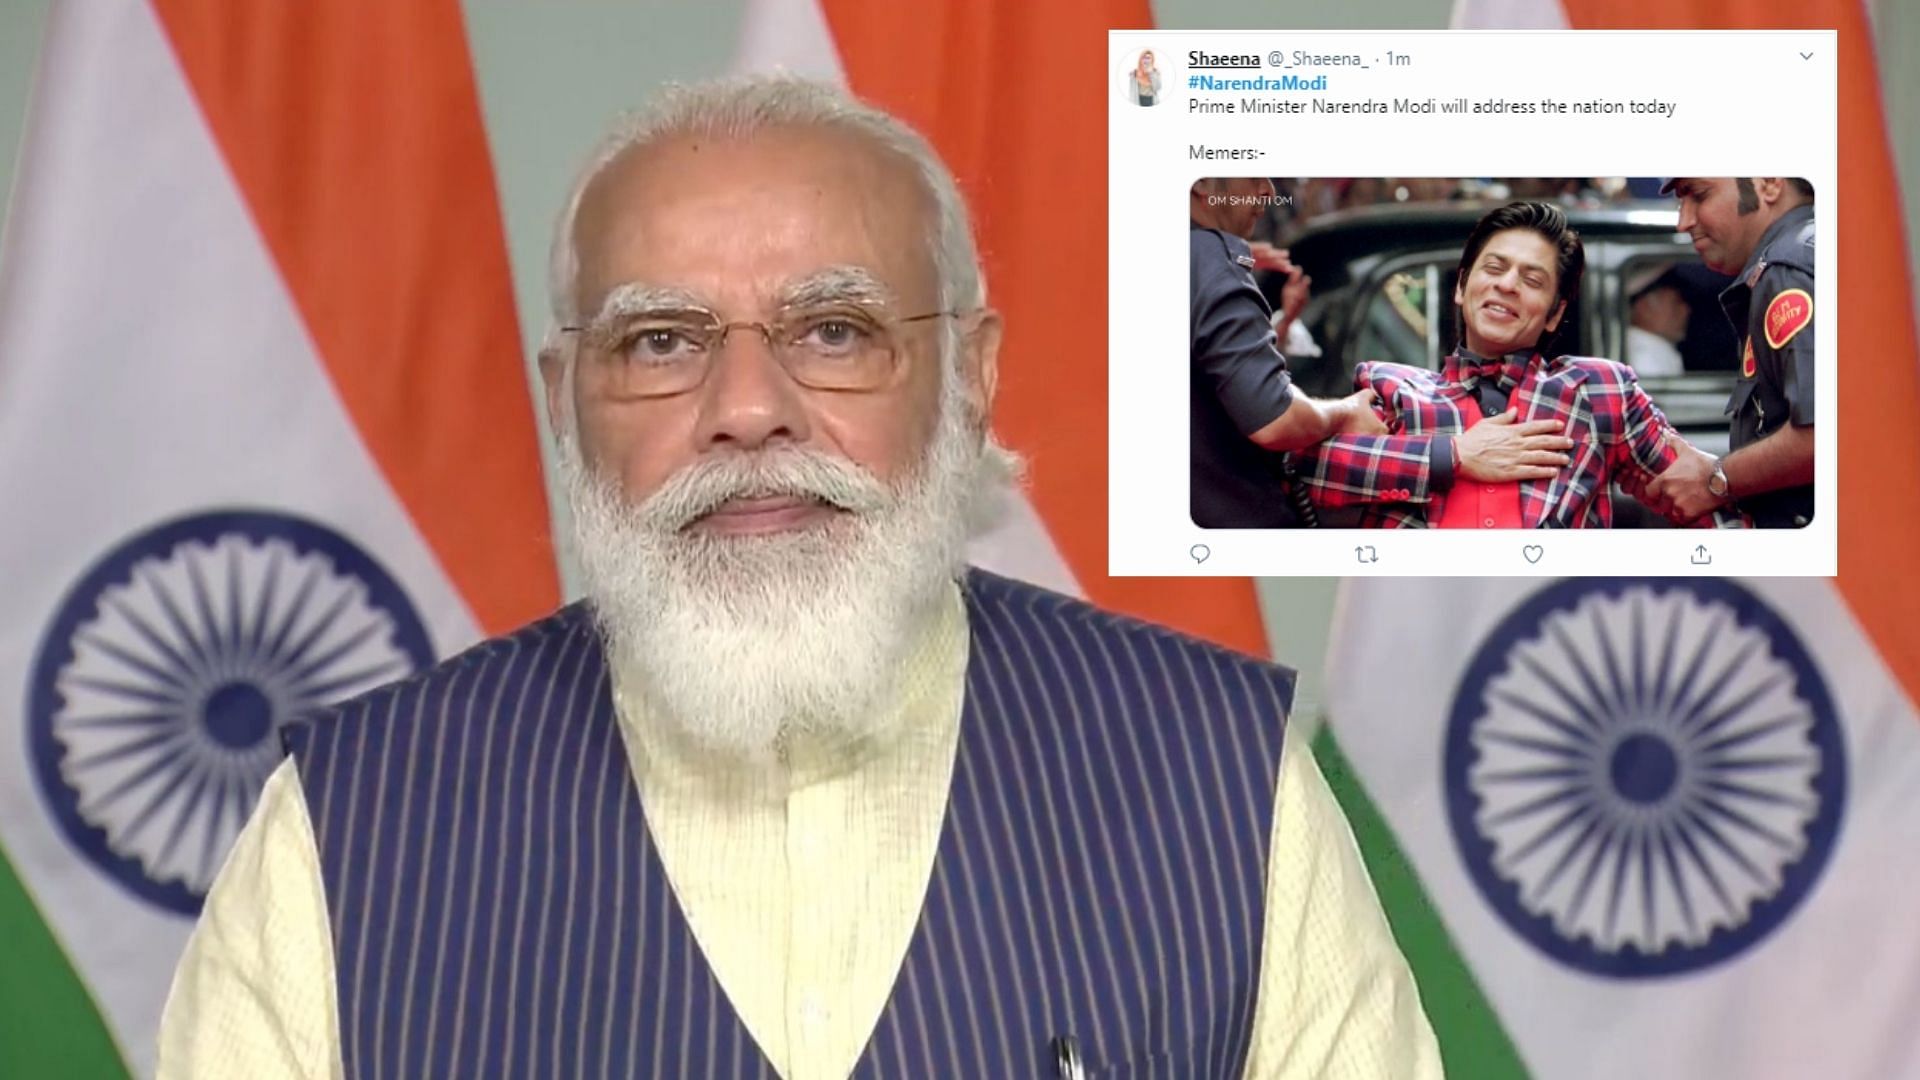 Ahead of Modi's Address, Twitter Awaits Memes With More Memes